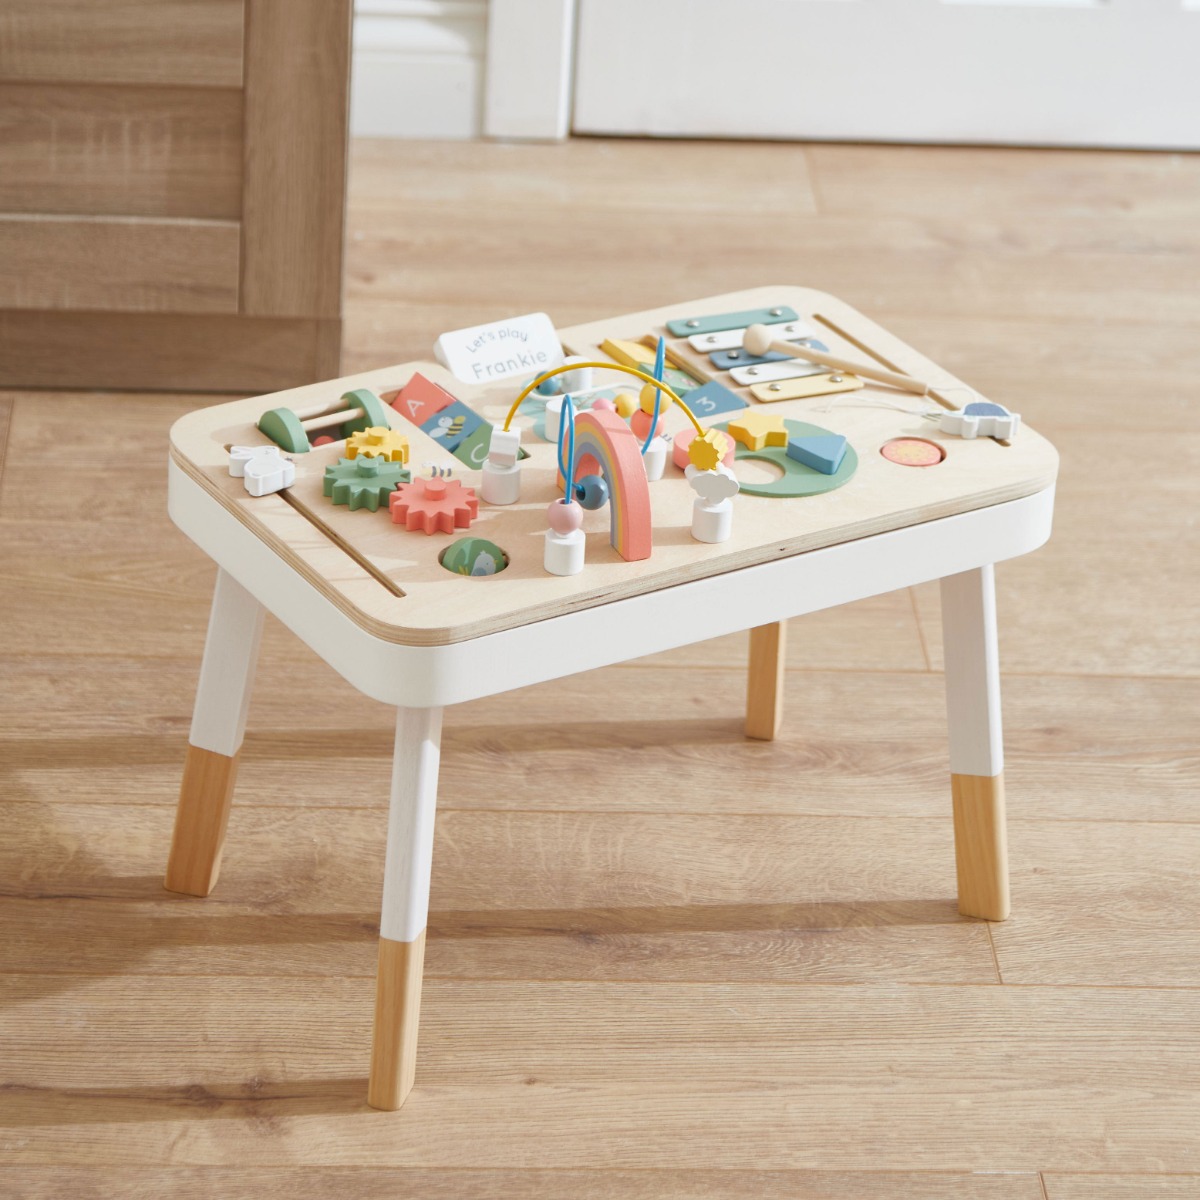 Personalised Wooden Children's Activity Table